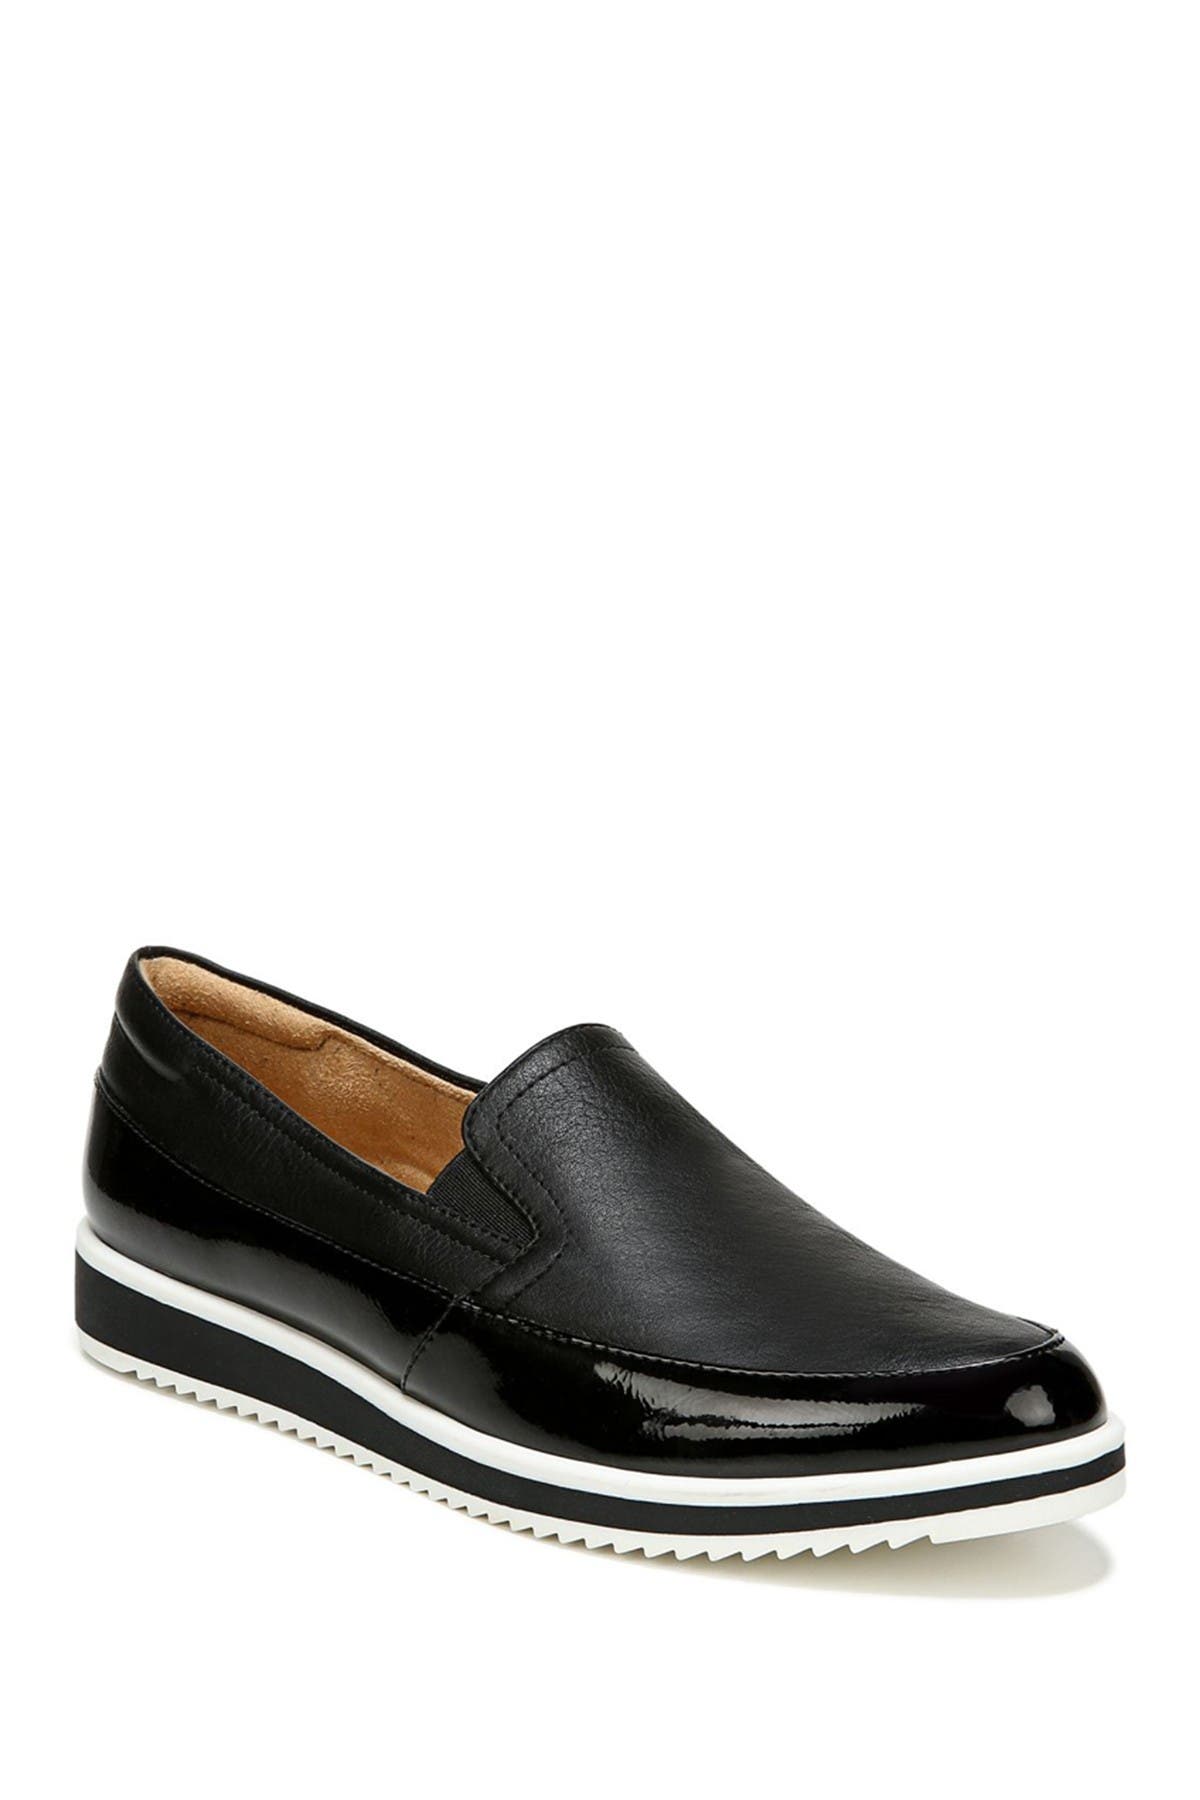 Loafers \u0026 Slip-Ons for Women 